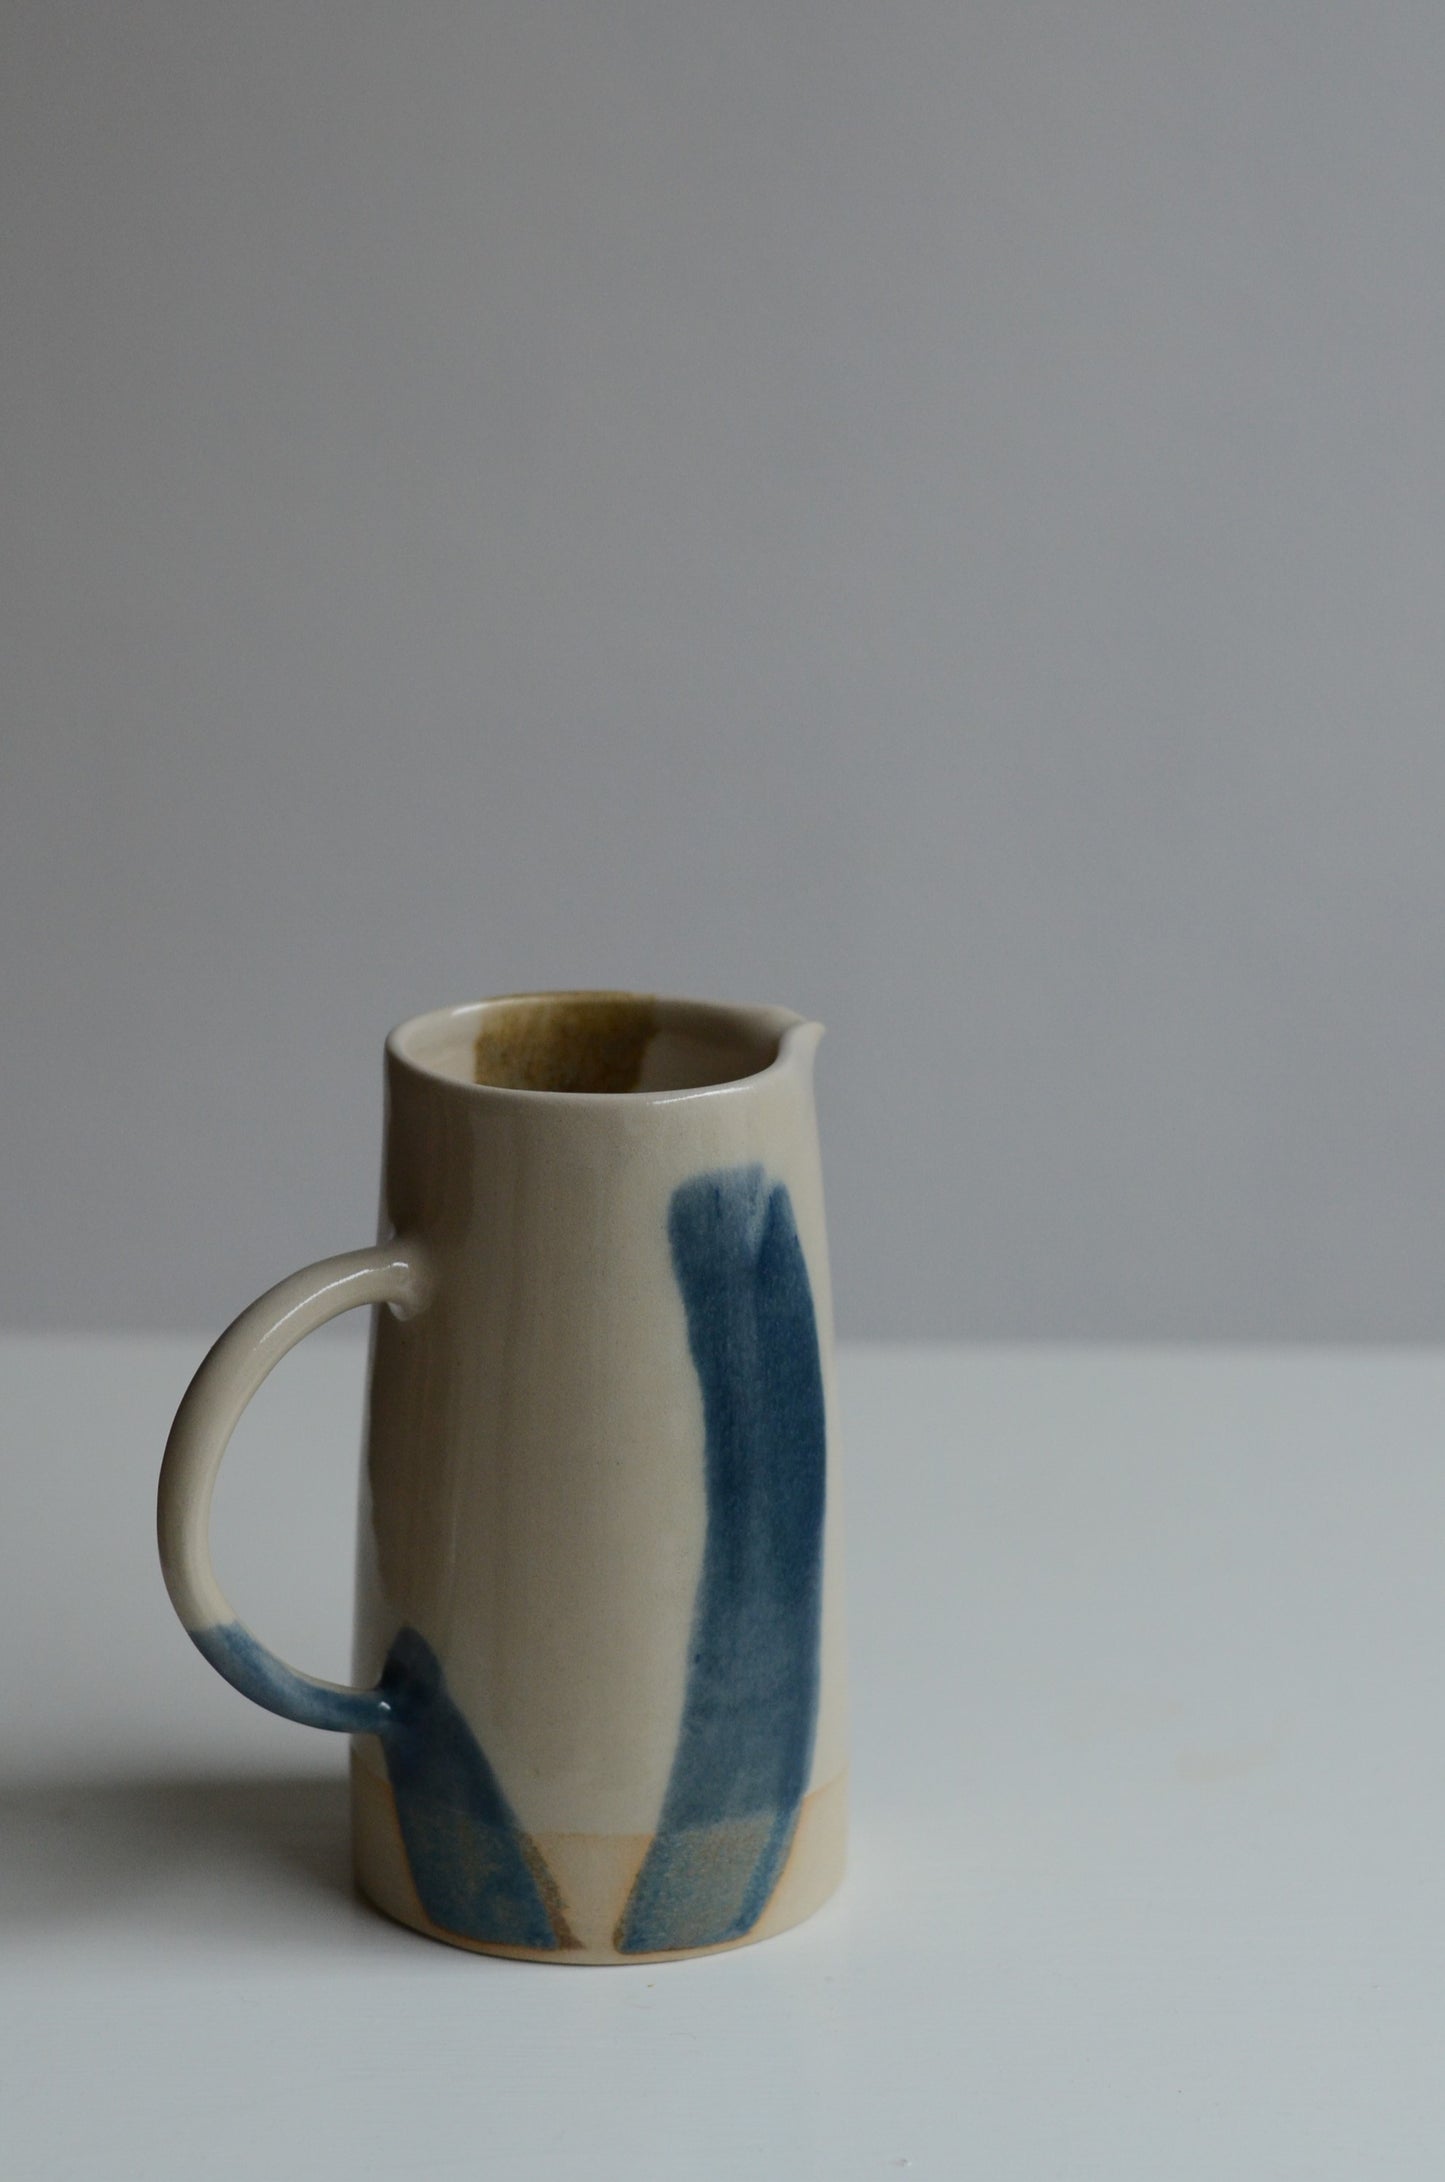 Yellow and blue striped jug